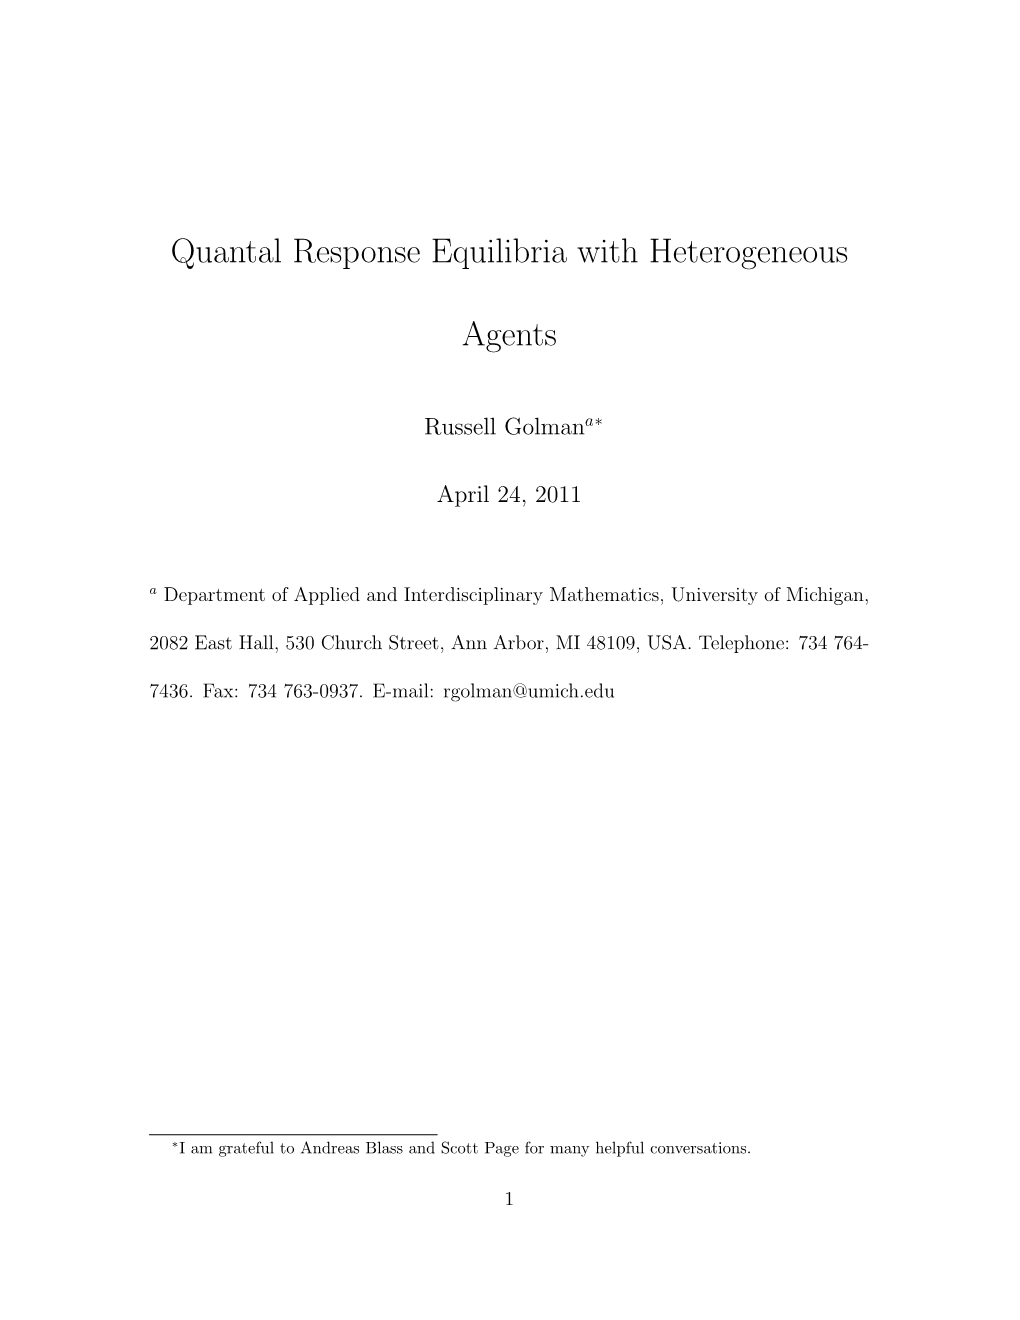 Quantal Response Equilibria with Heterogeneous Agents